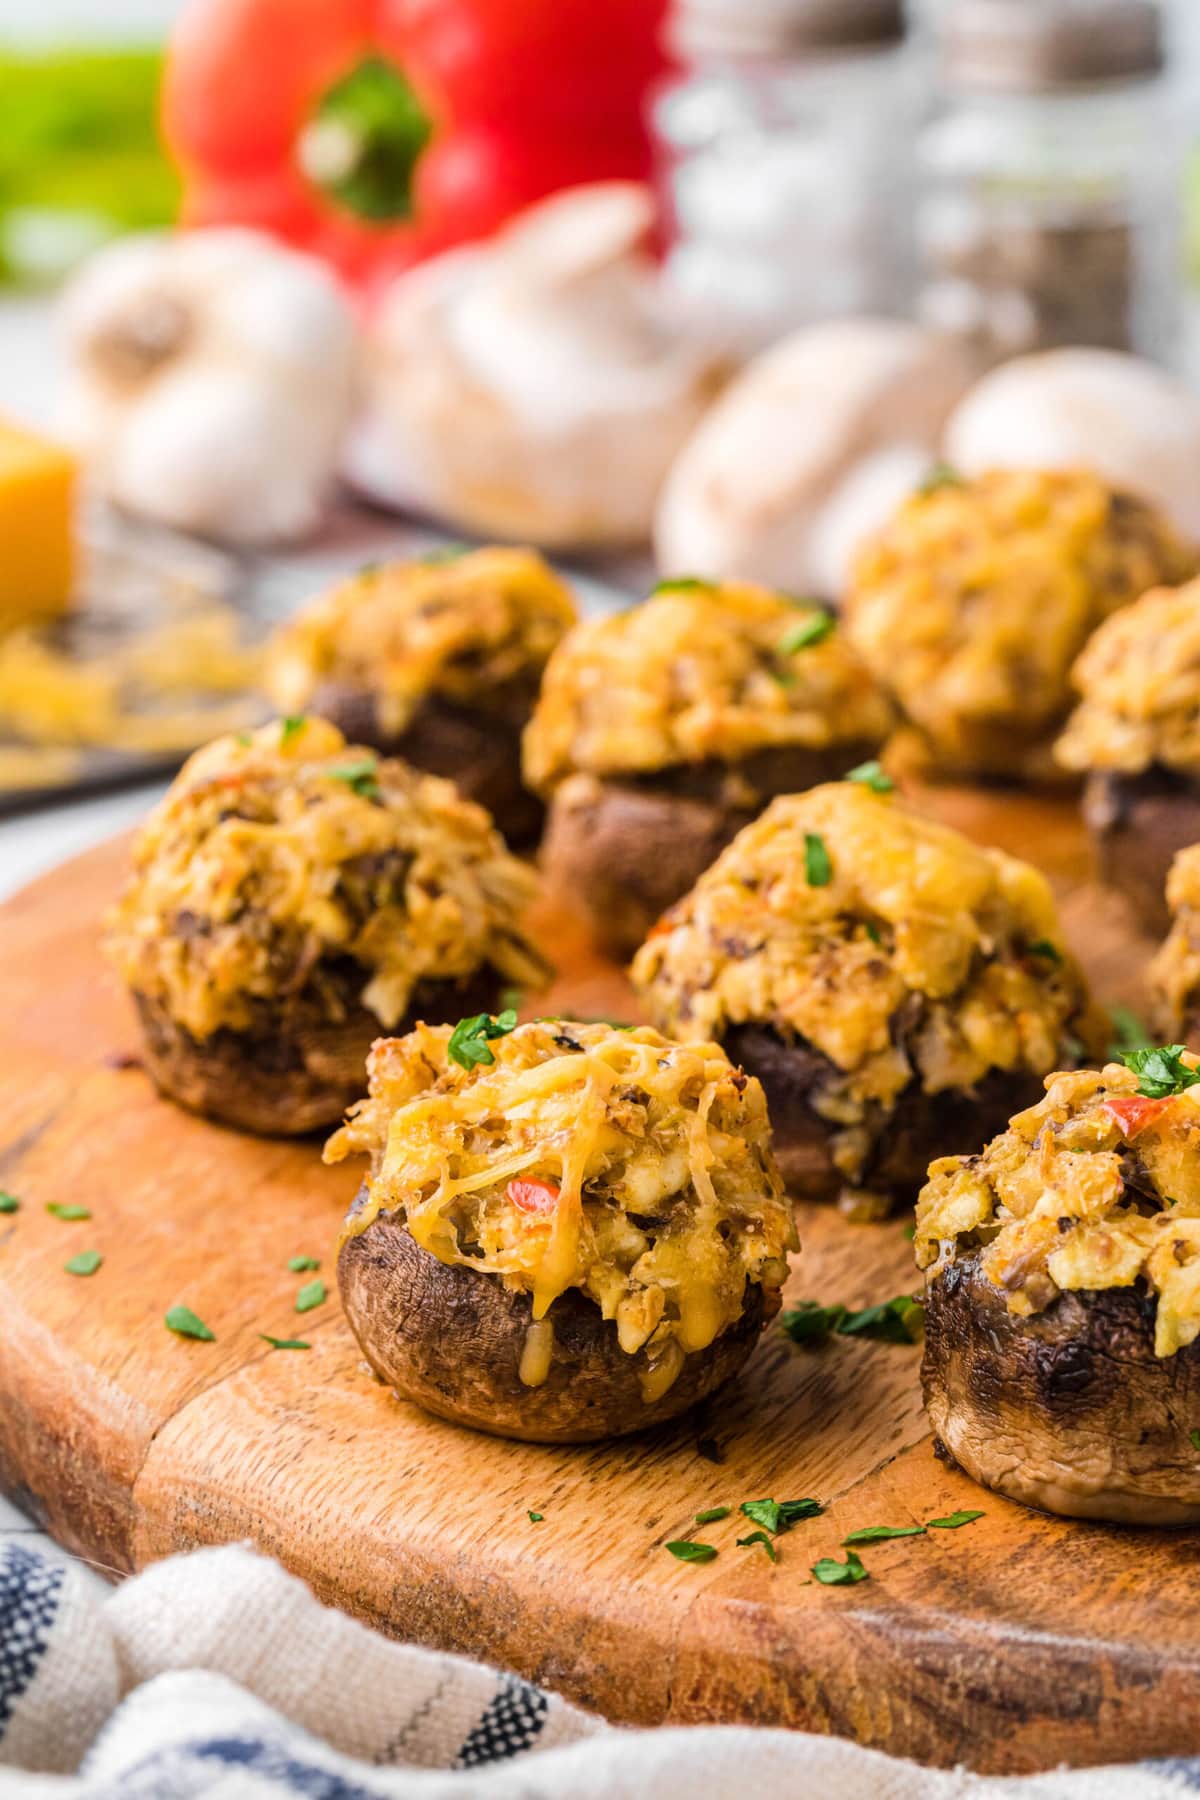 Stuffed mushrooms topped with melted cheese sit on a wooden platter.